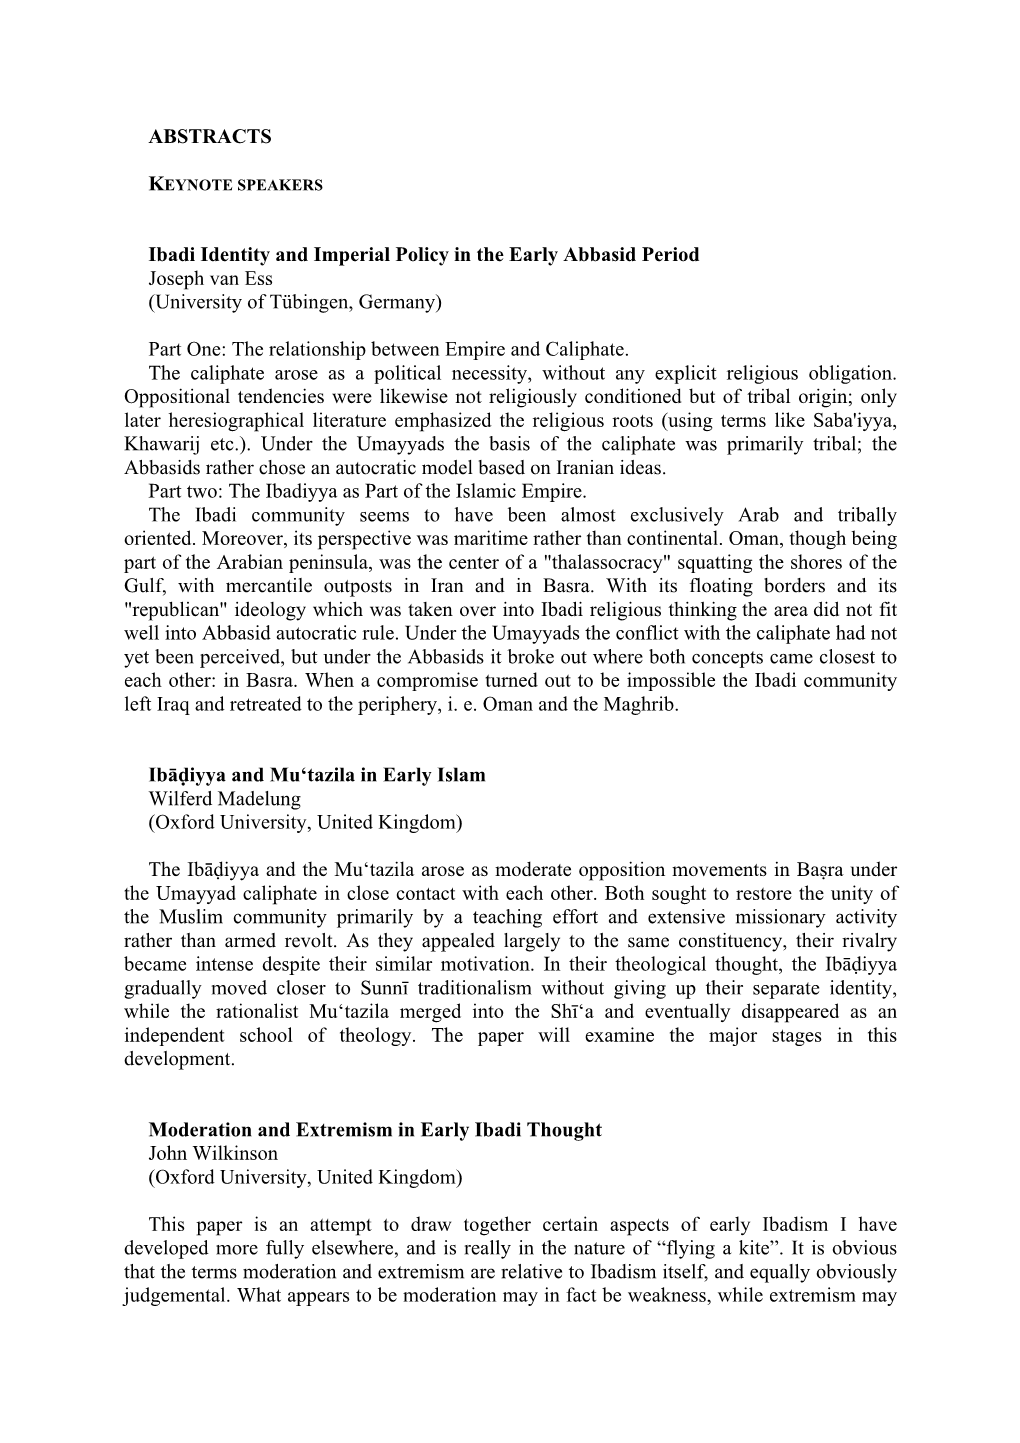 ABSTRACTS Ibadi Identity and Imperial Policy in the Early Abbasid